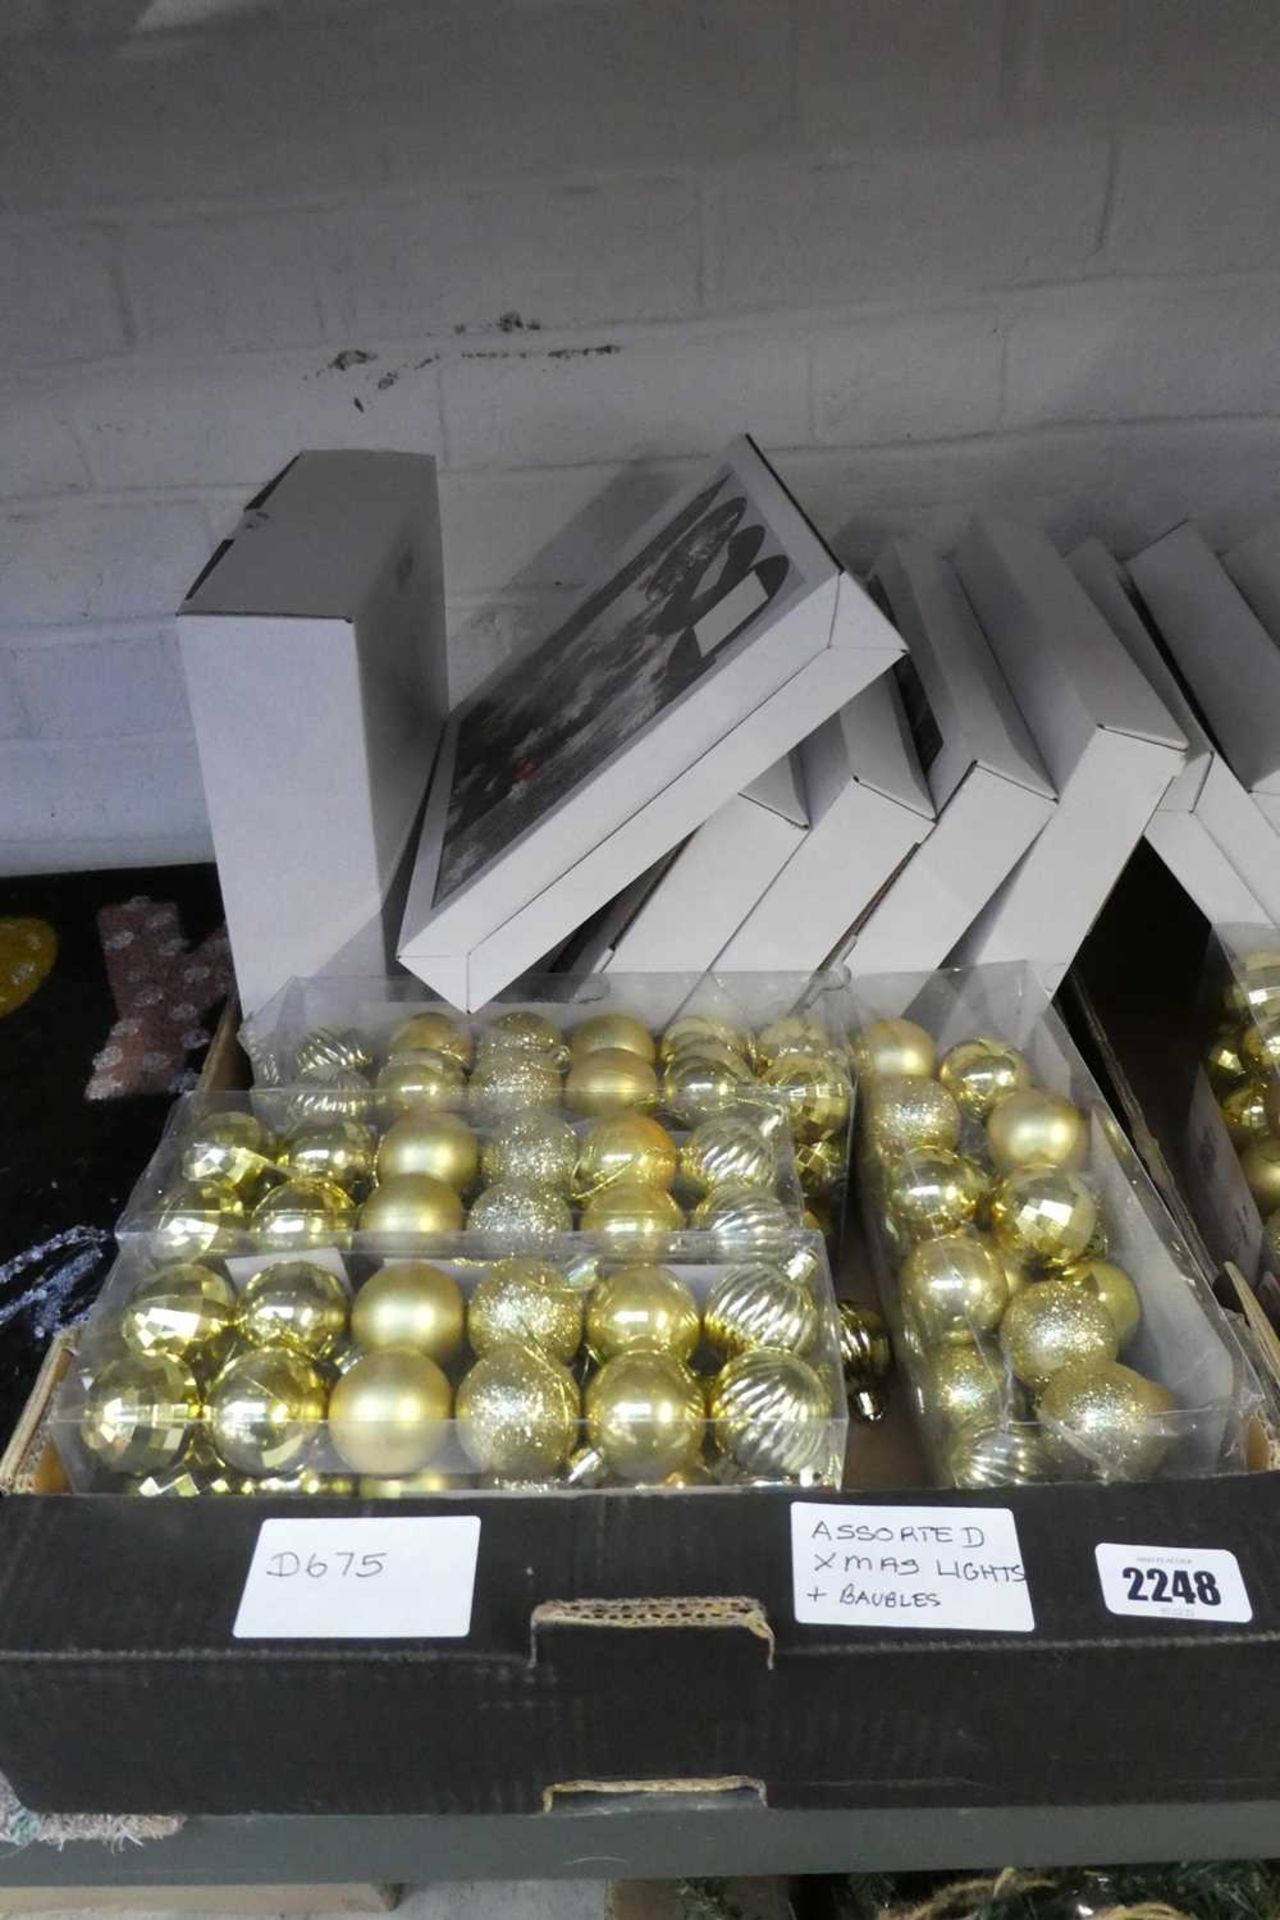 Box containing Christmas lights and baubles